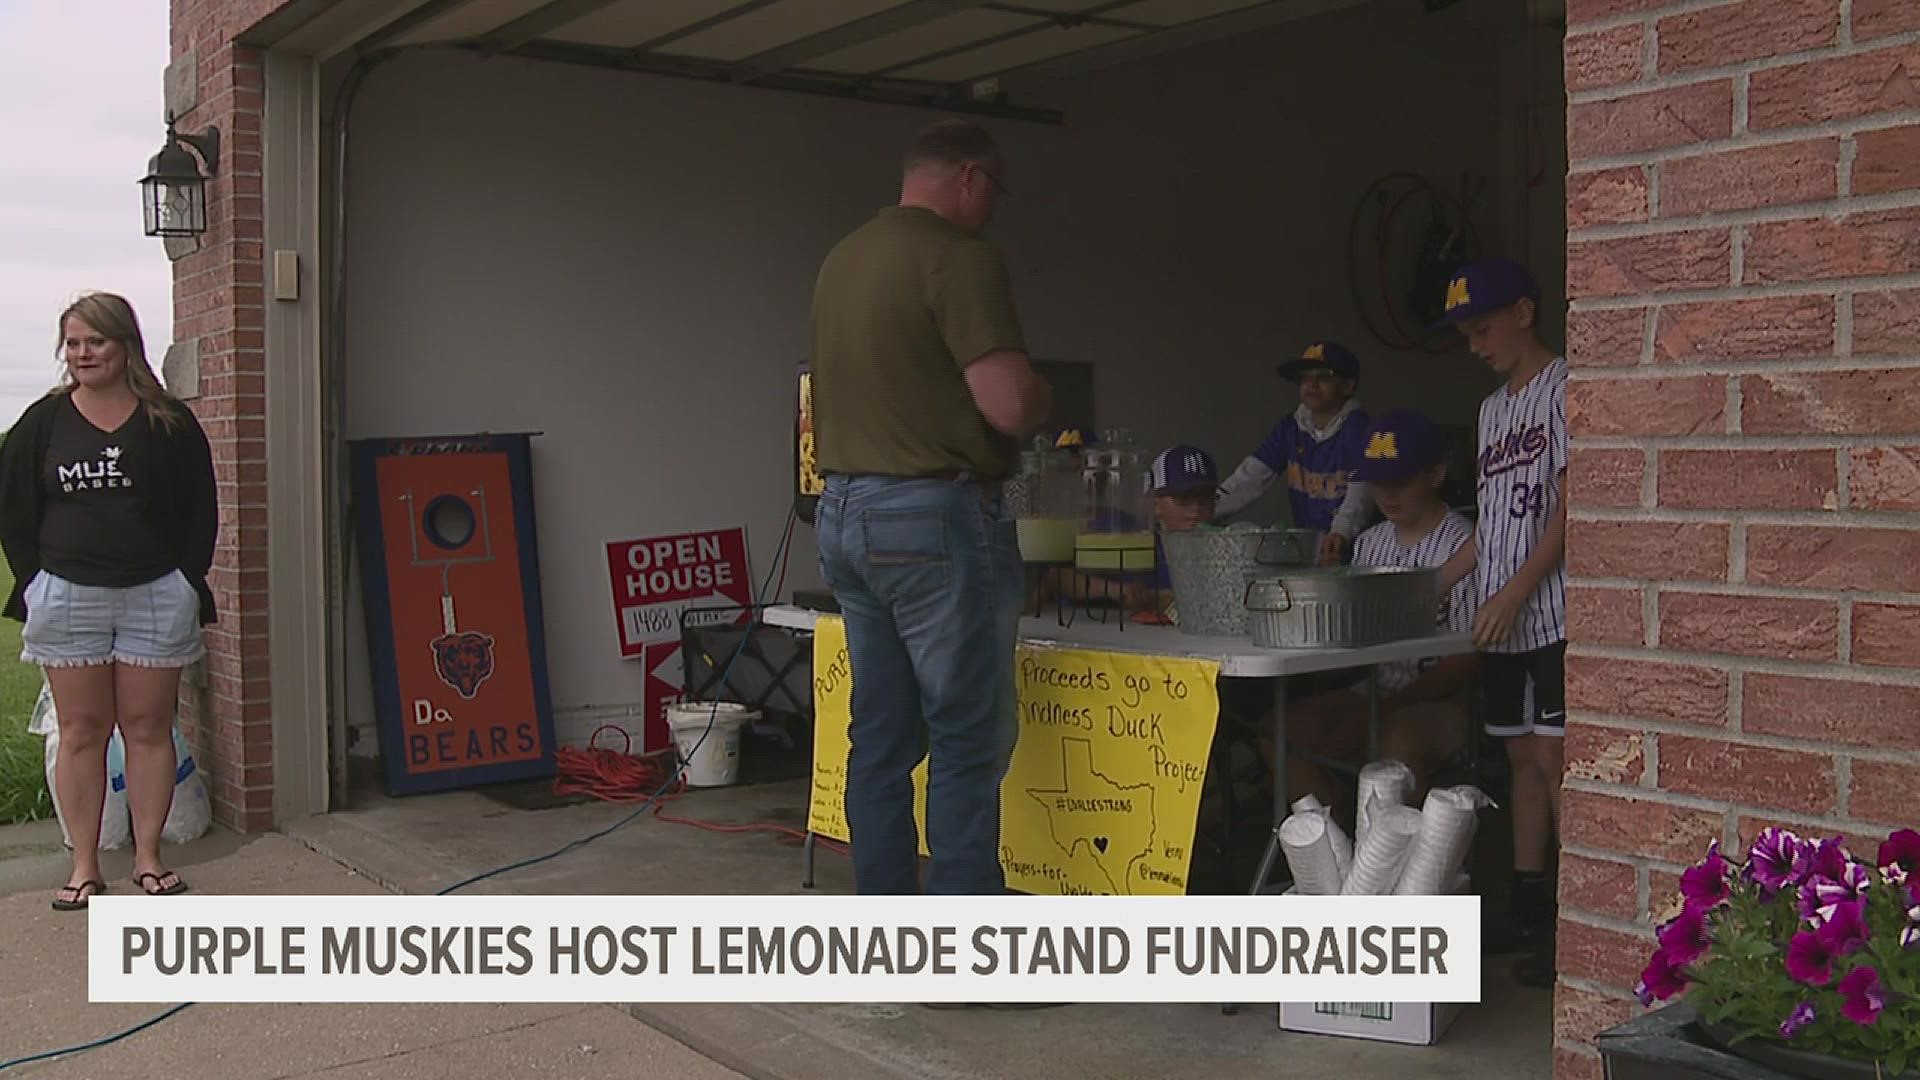 The Purple Muskies showed their love and support in a lemonade stand on Friday with all proceeds going towards the Kindness Duck Project.